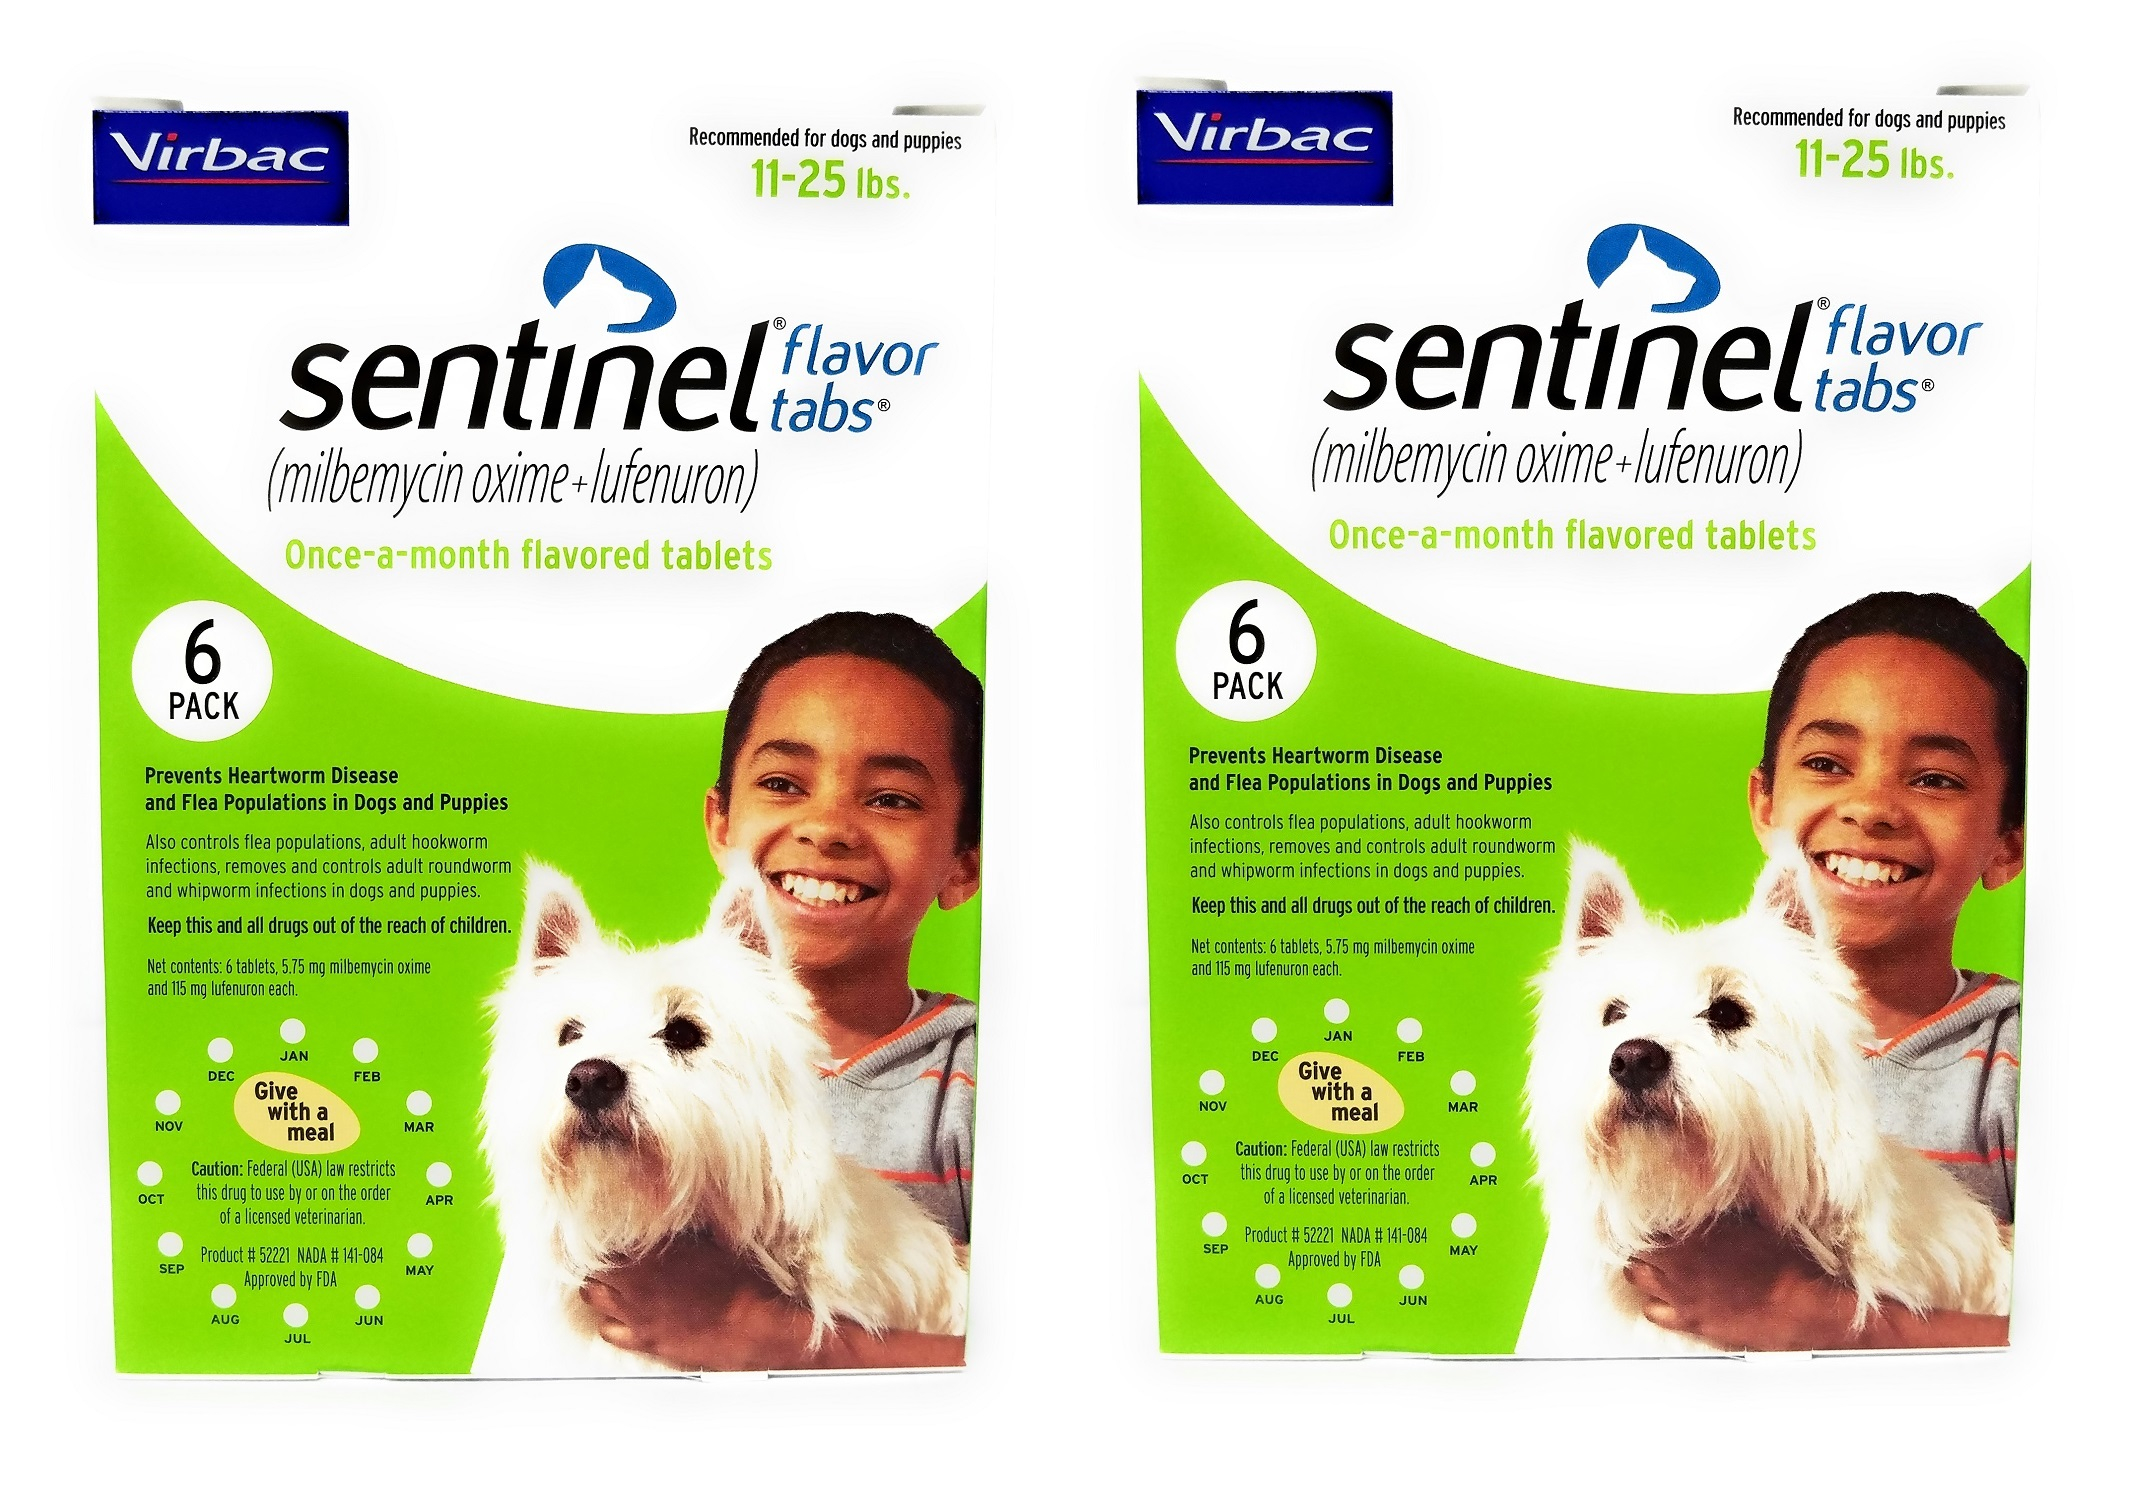 vet-approved-rx-sentinel-flavor-tabs-11-25-lbs-12-doses-for-pets